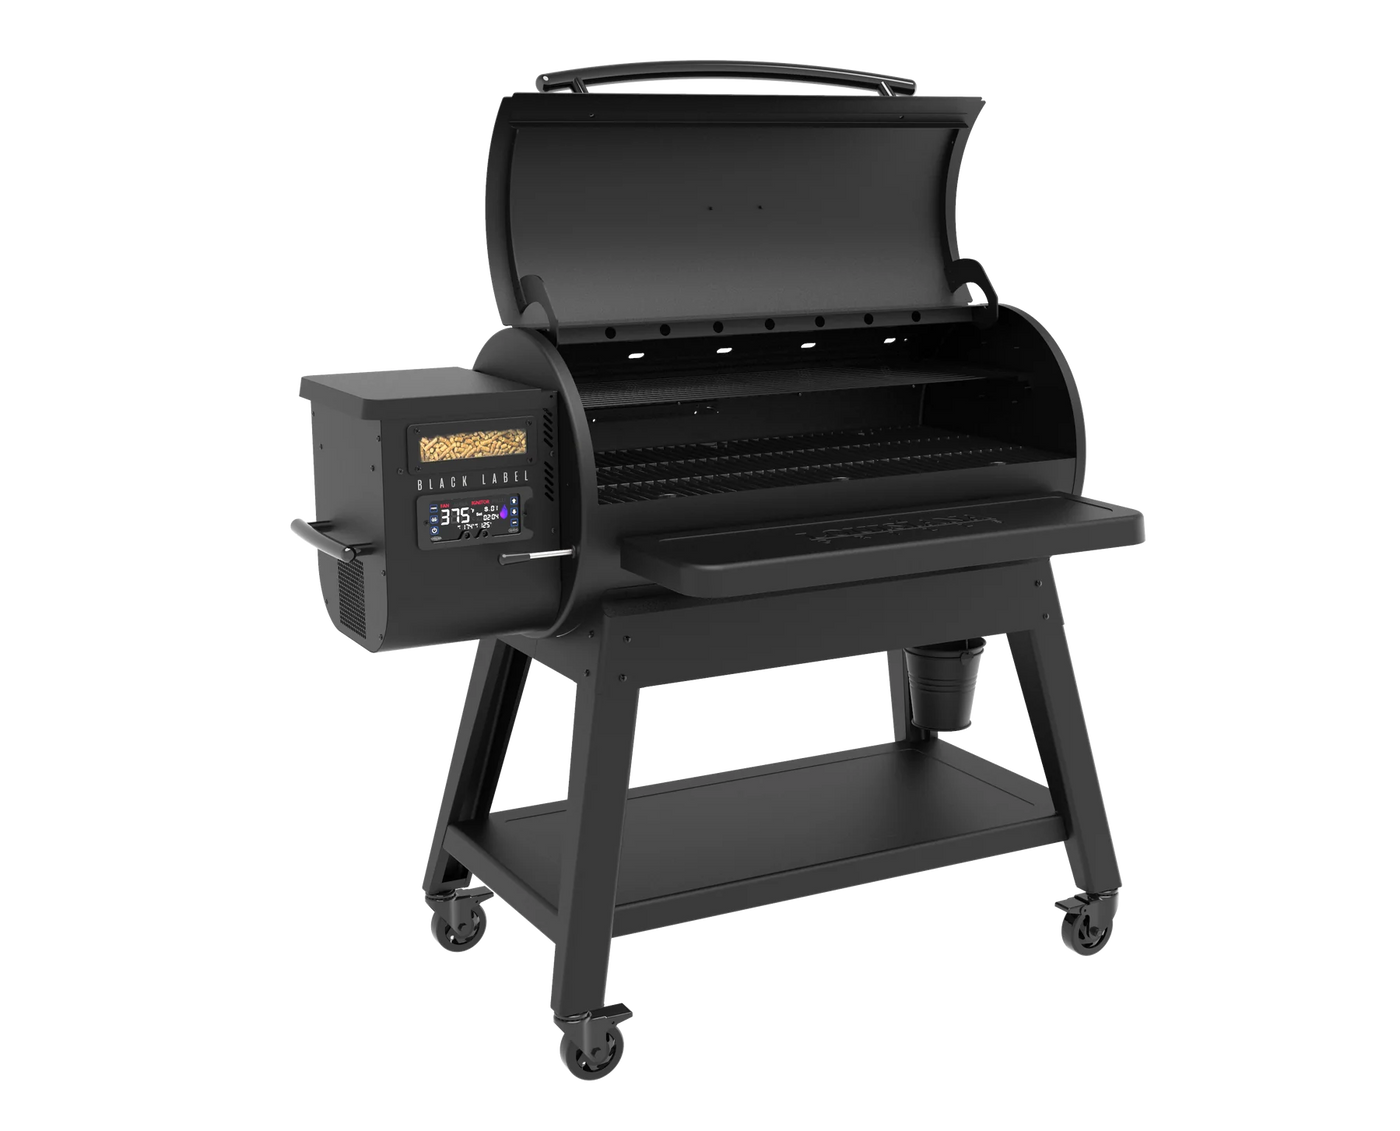 Louisiana Grills 1200 Black Label Series with Wifi Control - Smart Nature Store